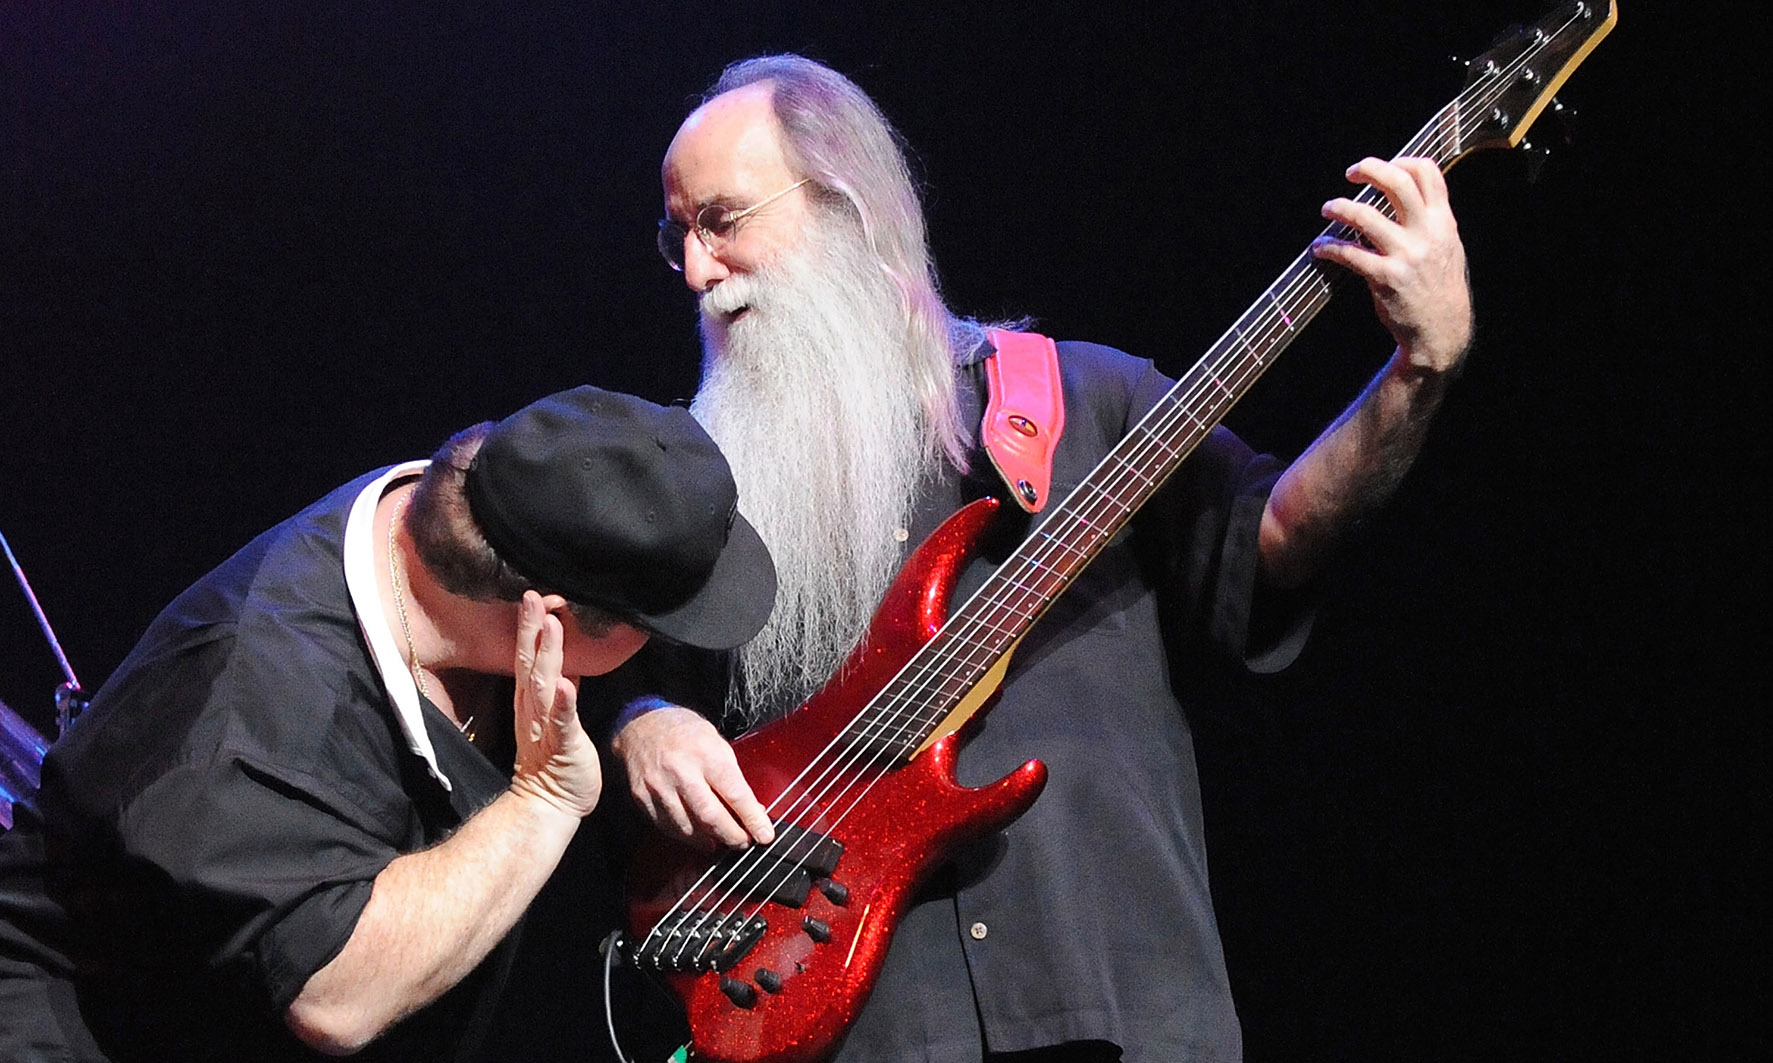 Musician Lee Sklar performs on stage at the Tokyo International Forum on March 29, 2008 in Tokyo, Japan.